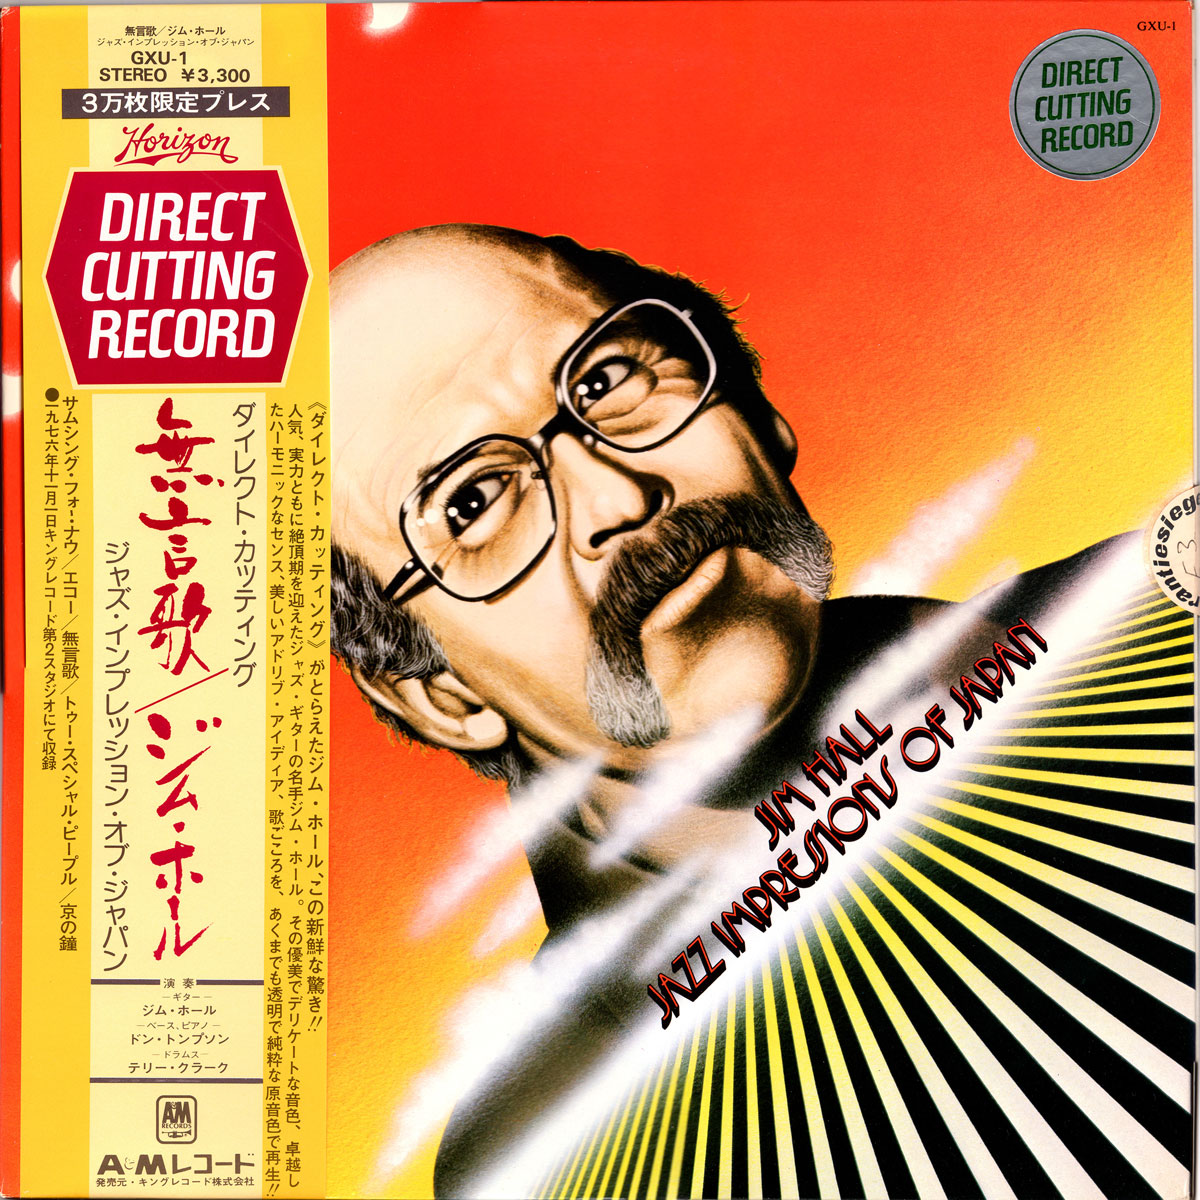 Jim Hall - Jazz Impressions Of Japan - Front cover